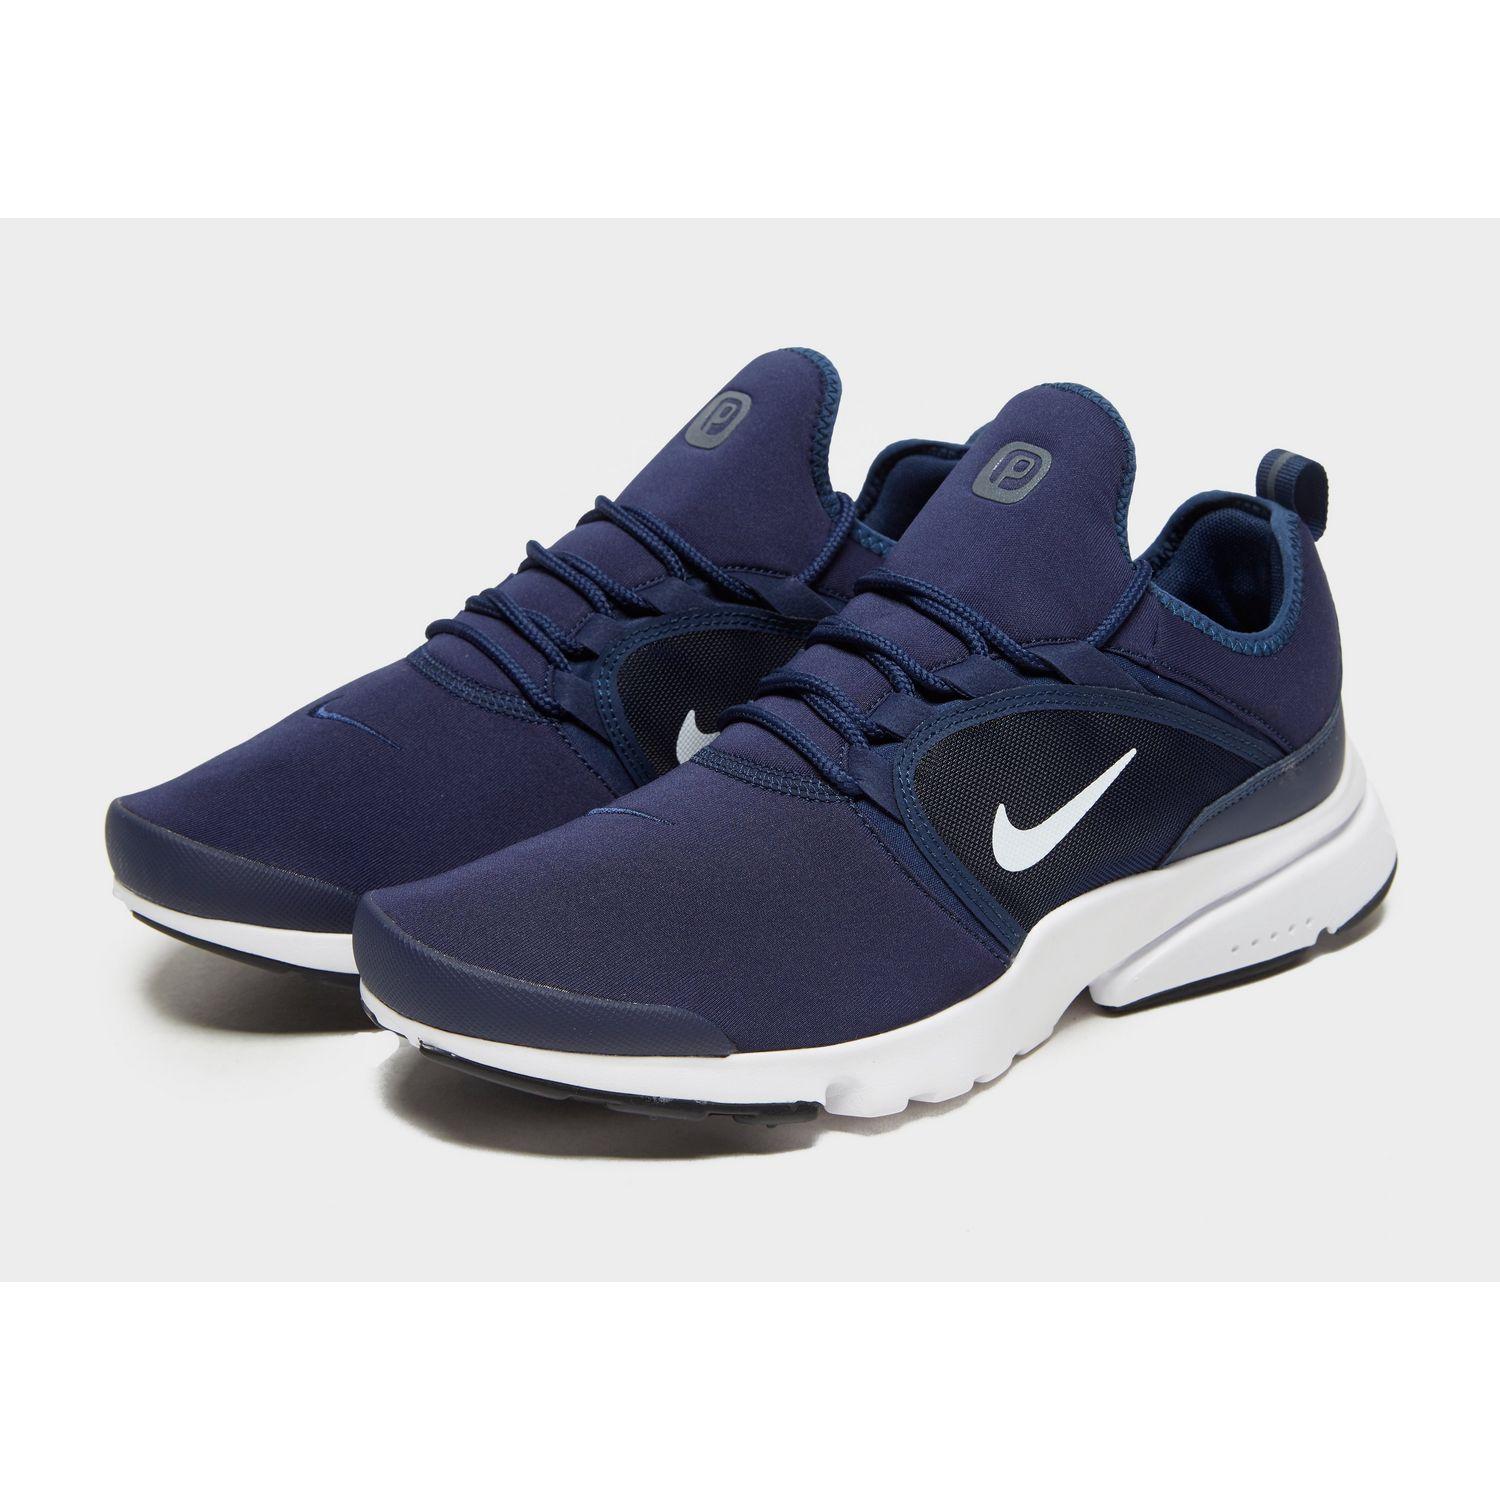 Nike Rubber Air Presto Fly World in 